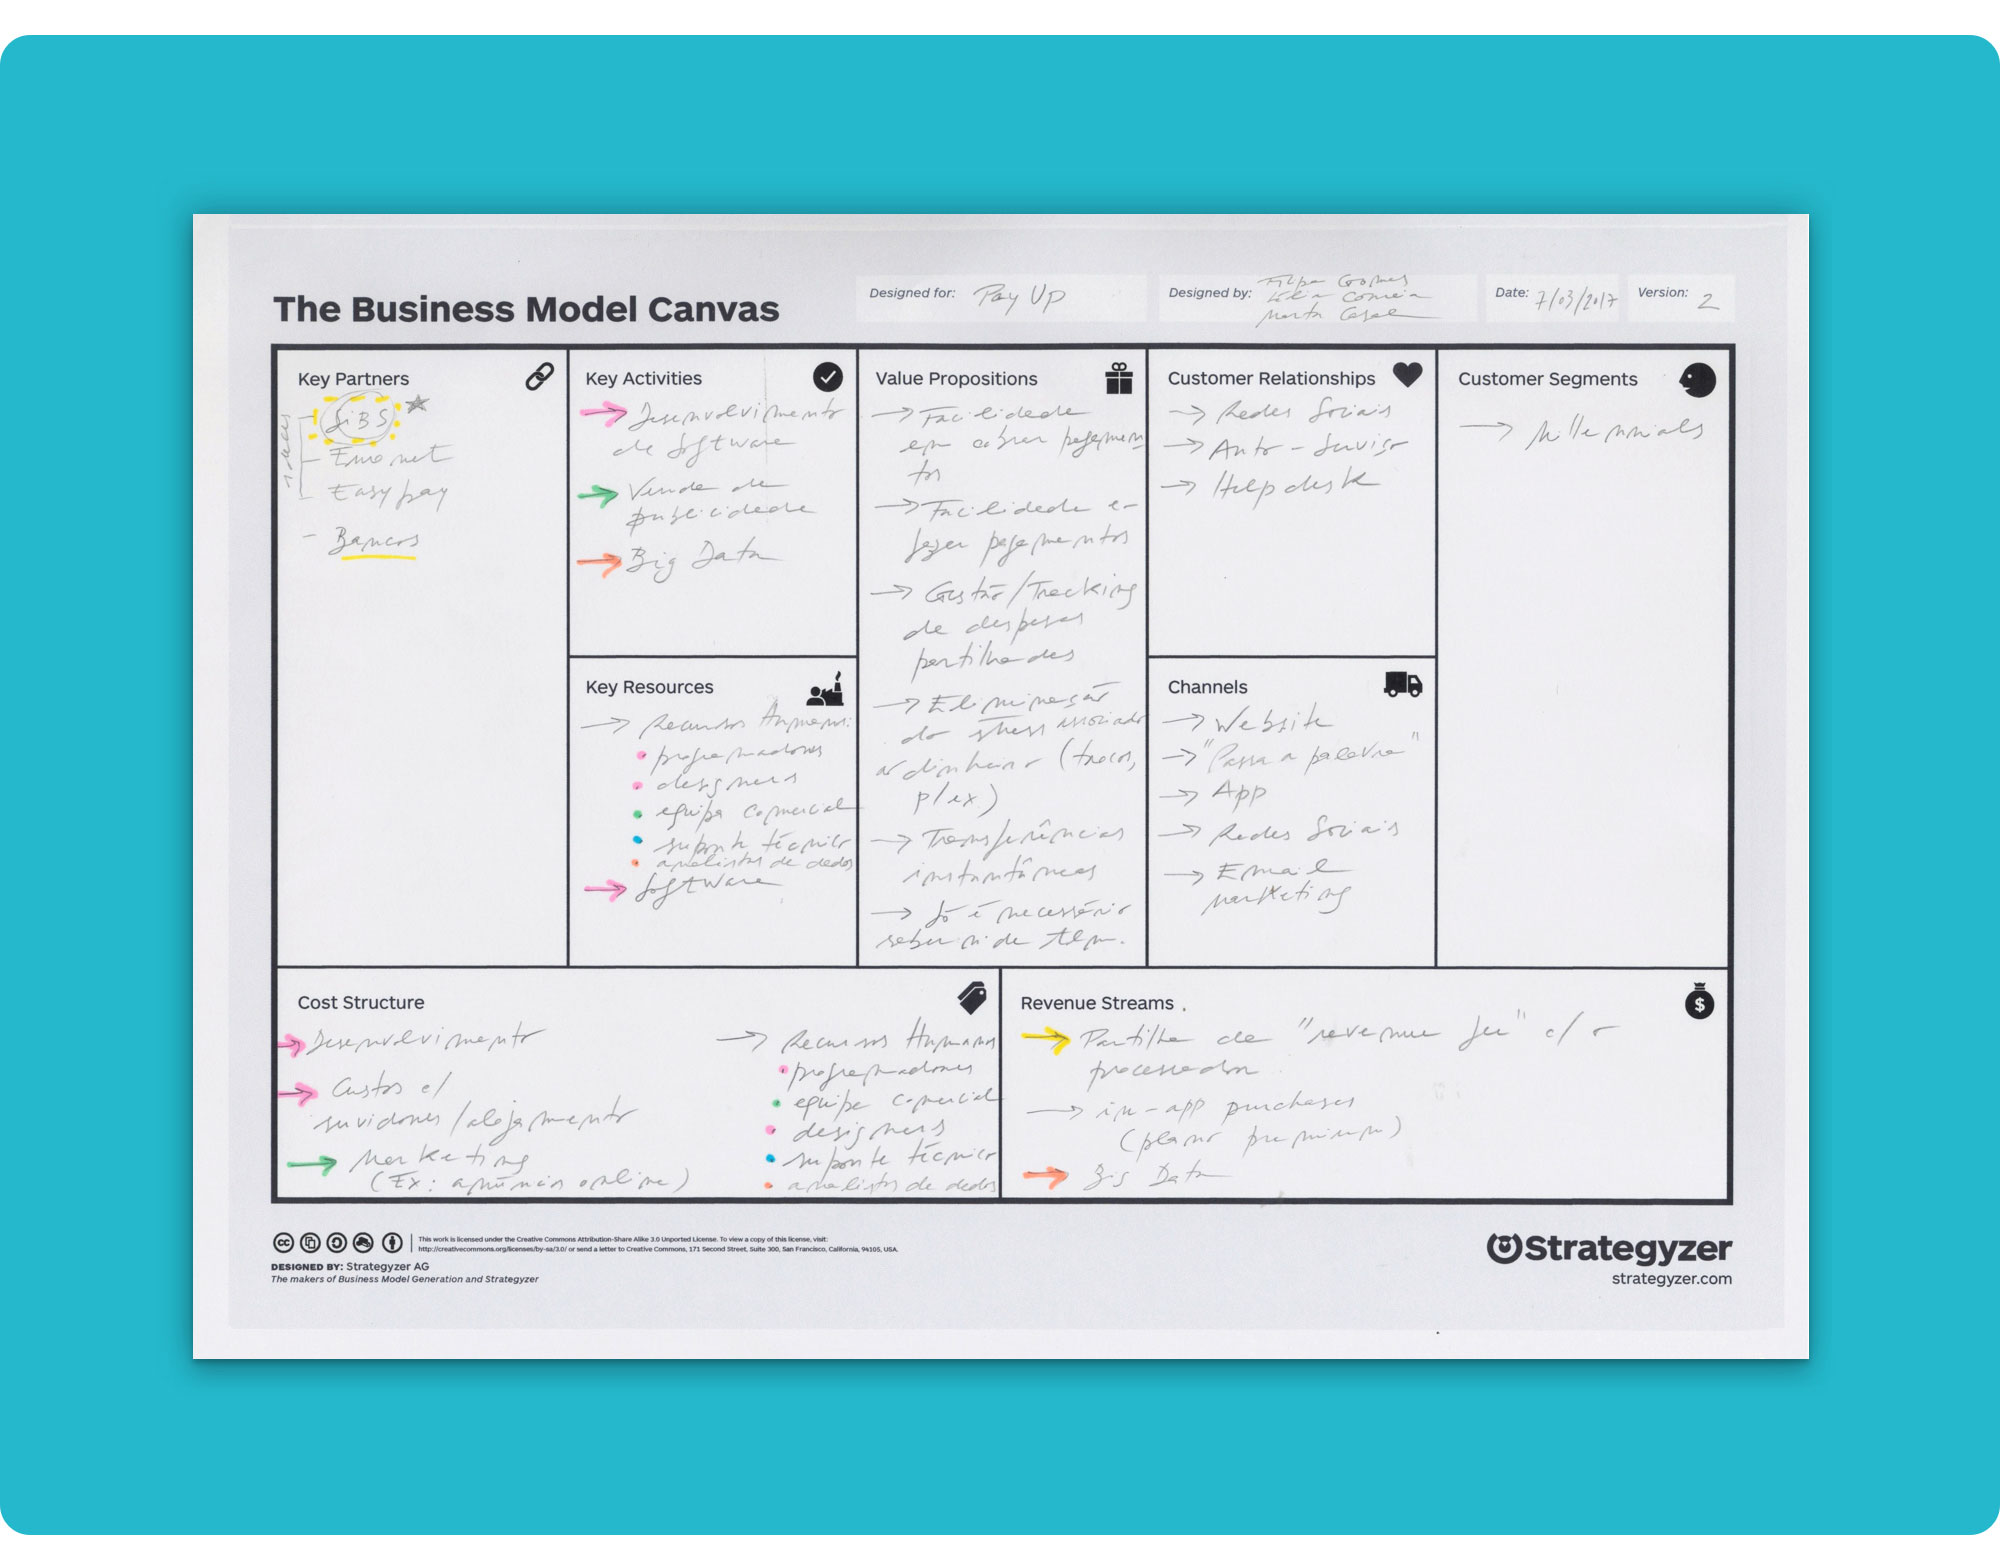 PayUp's Business Model Canvas